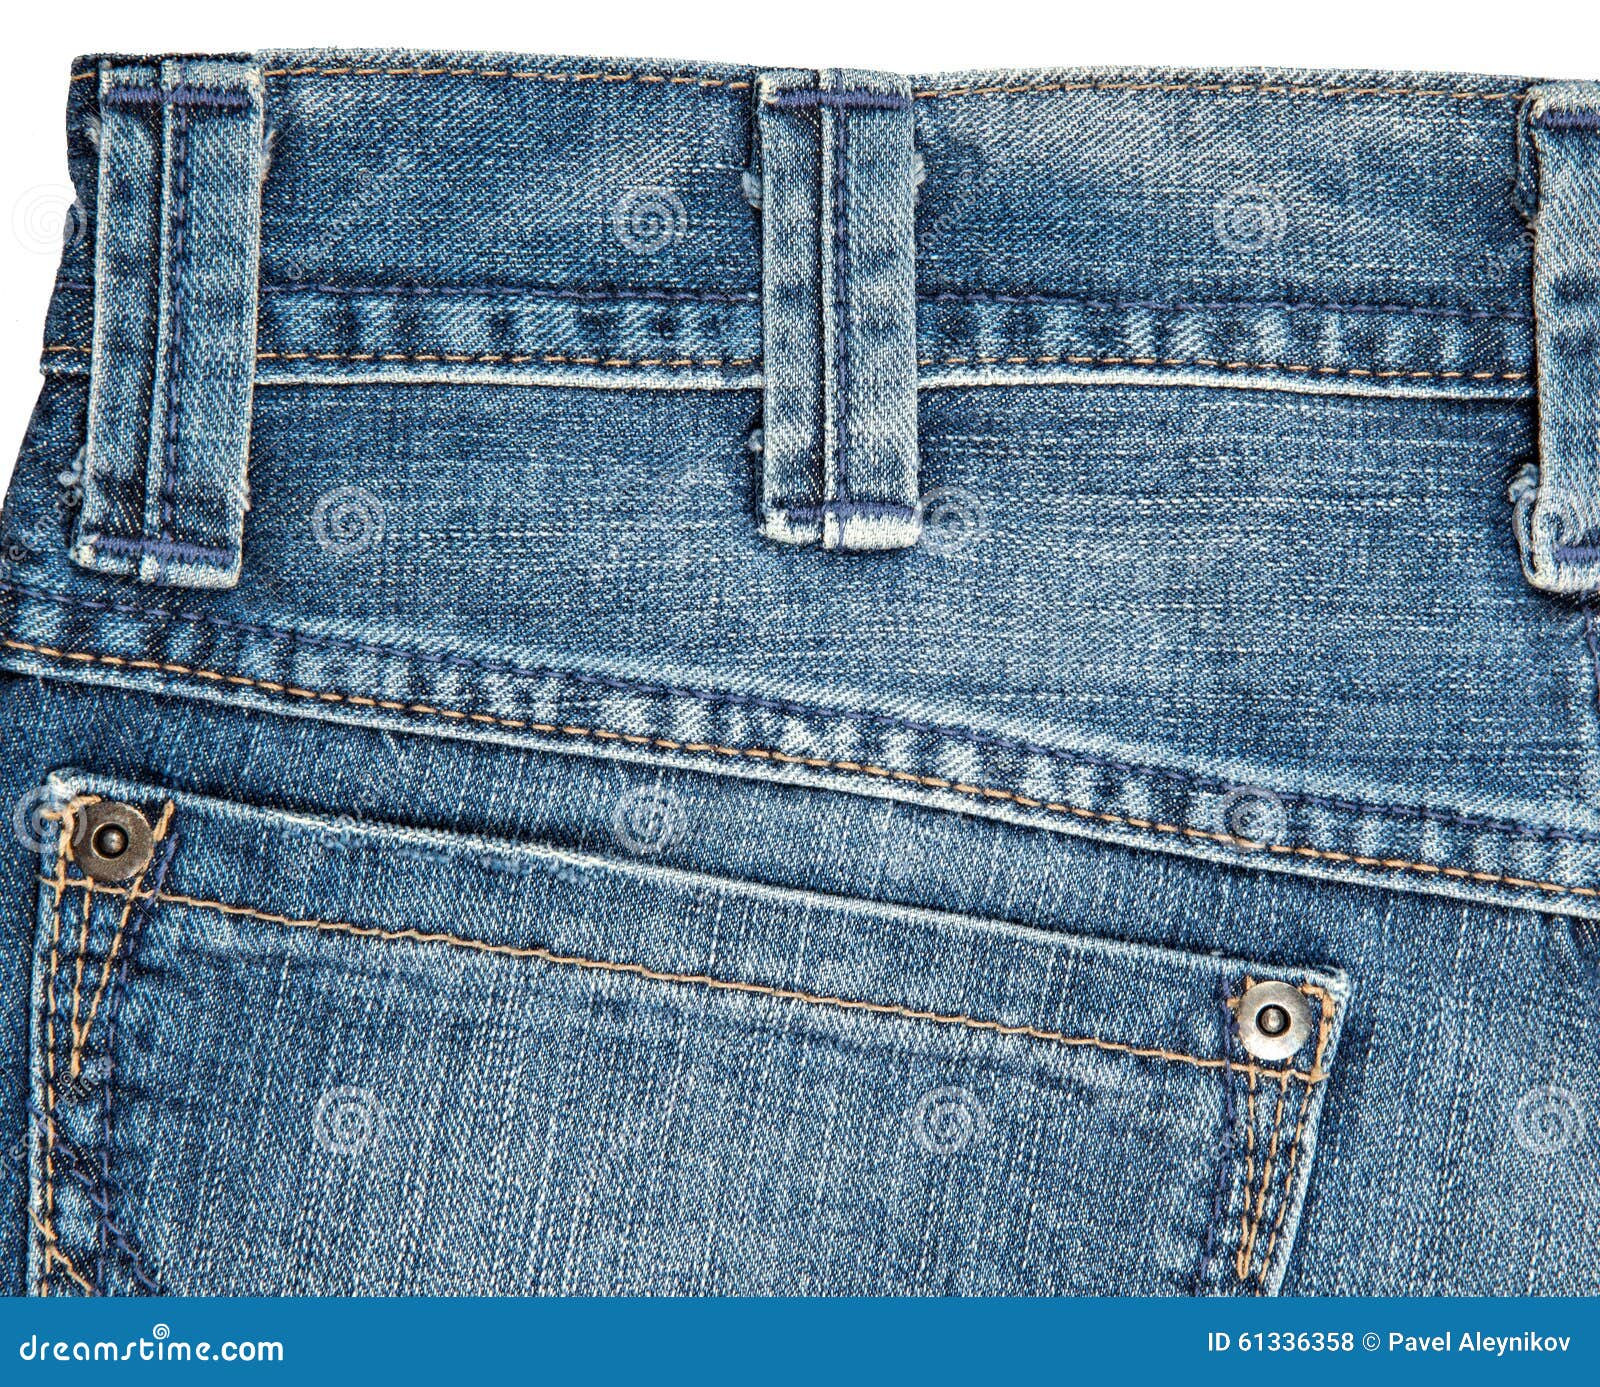 Denim close-up stock photo. Image of clothes, casual - 61336358